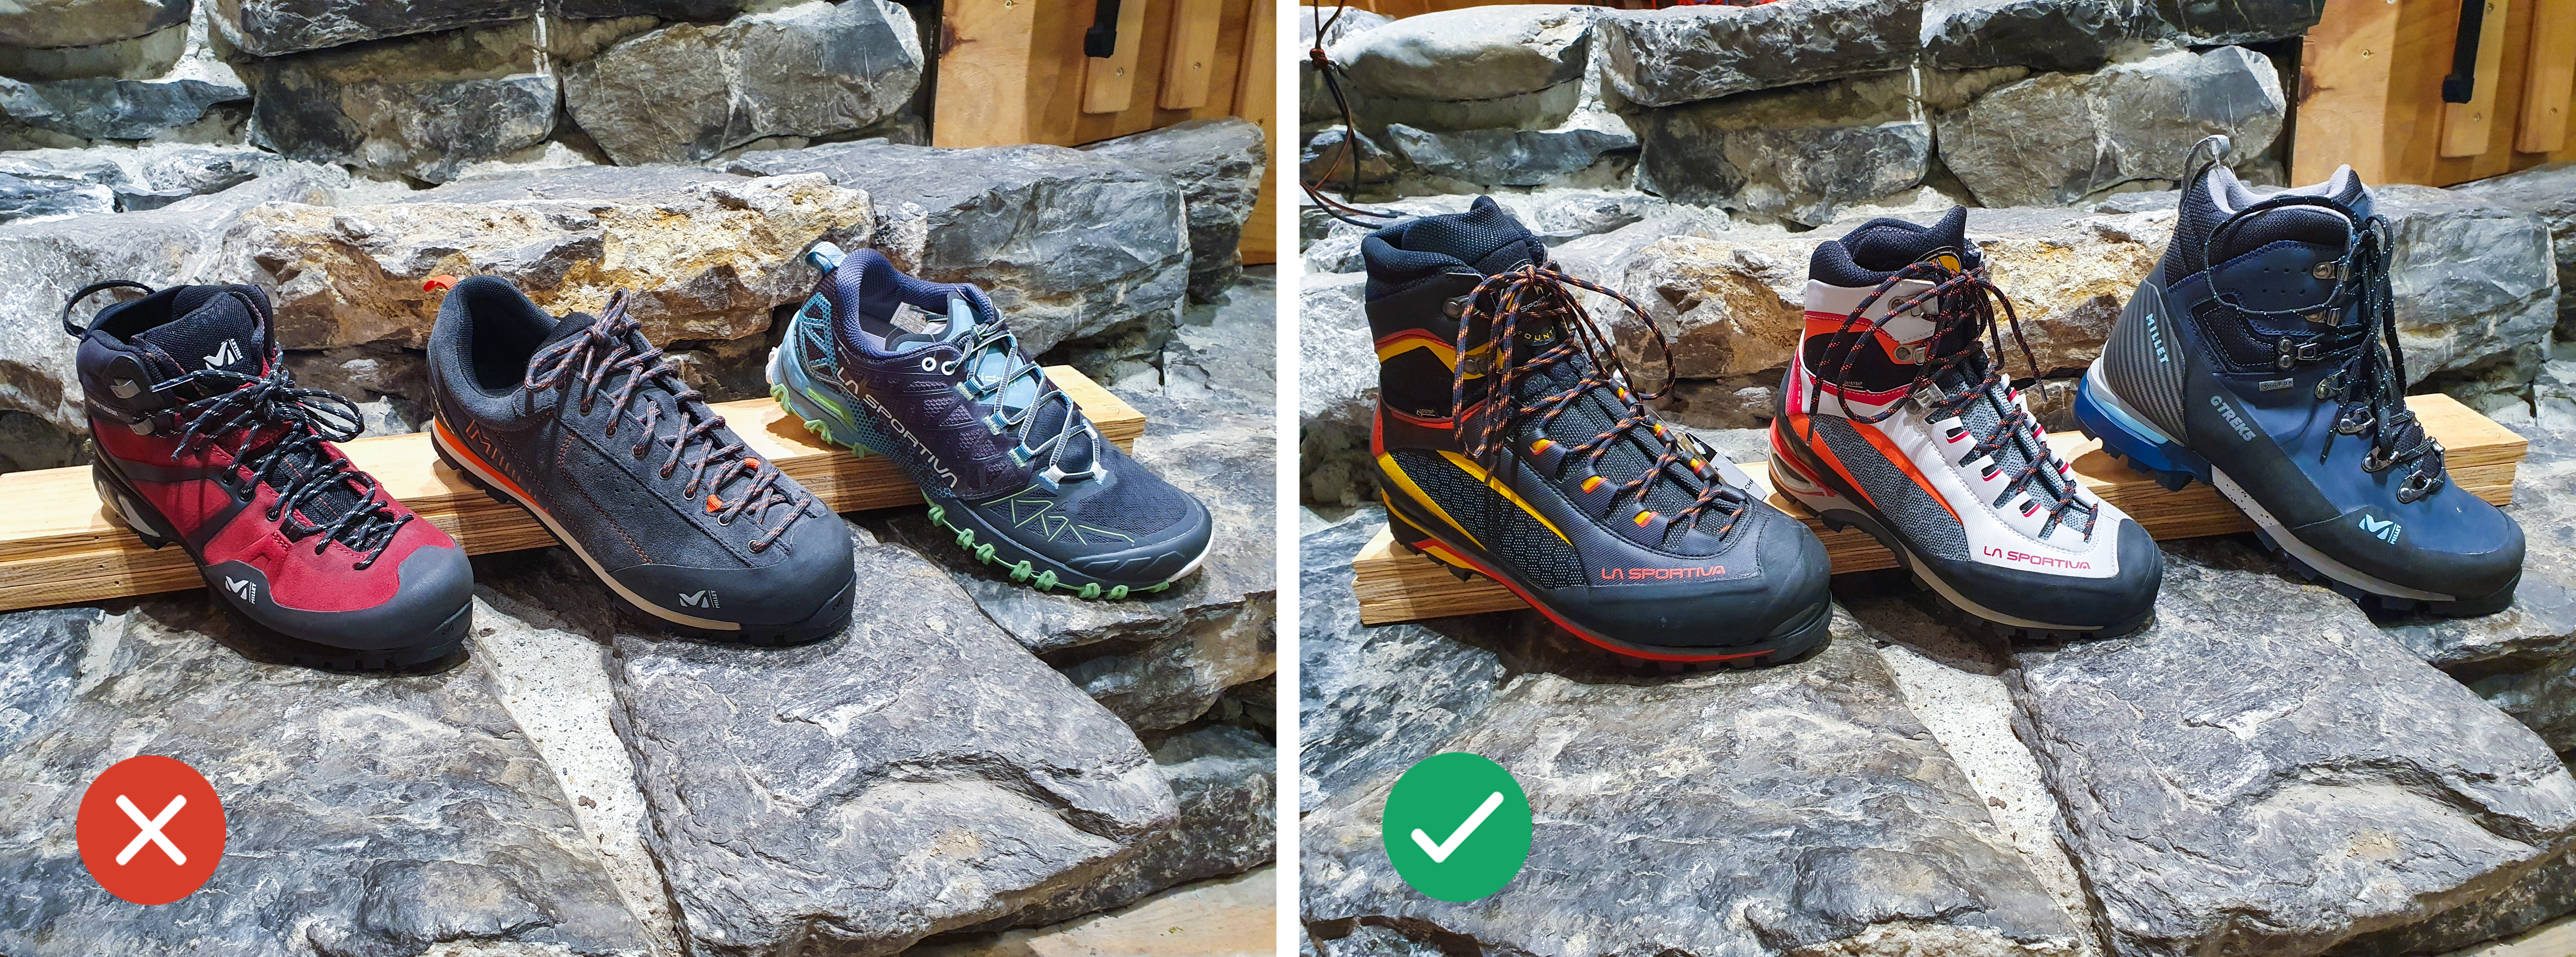 Footwear examples for Glacier Hikes